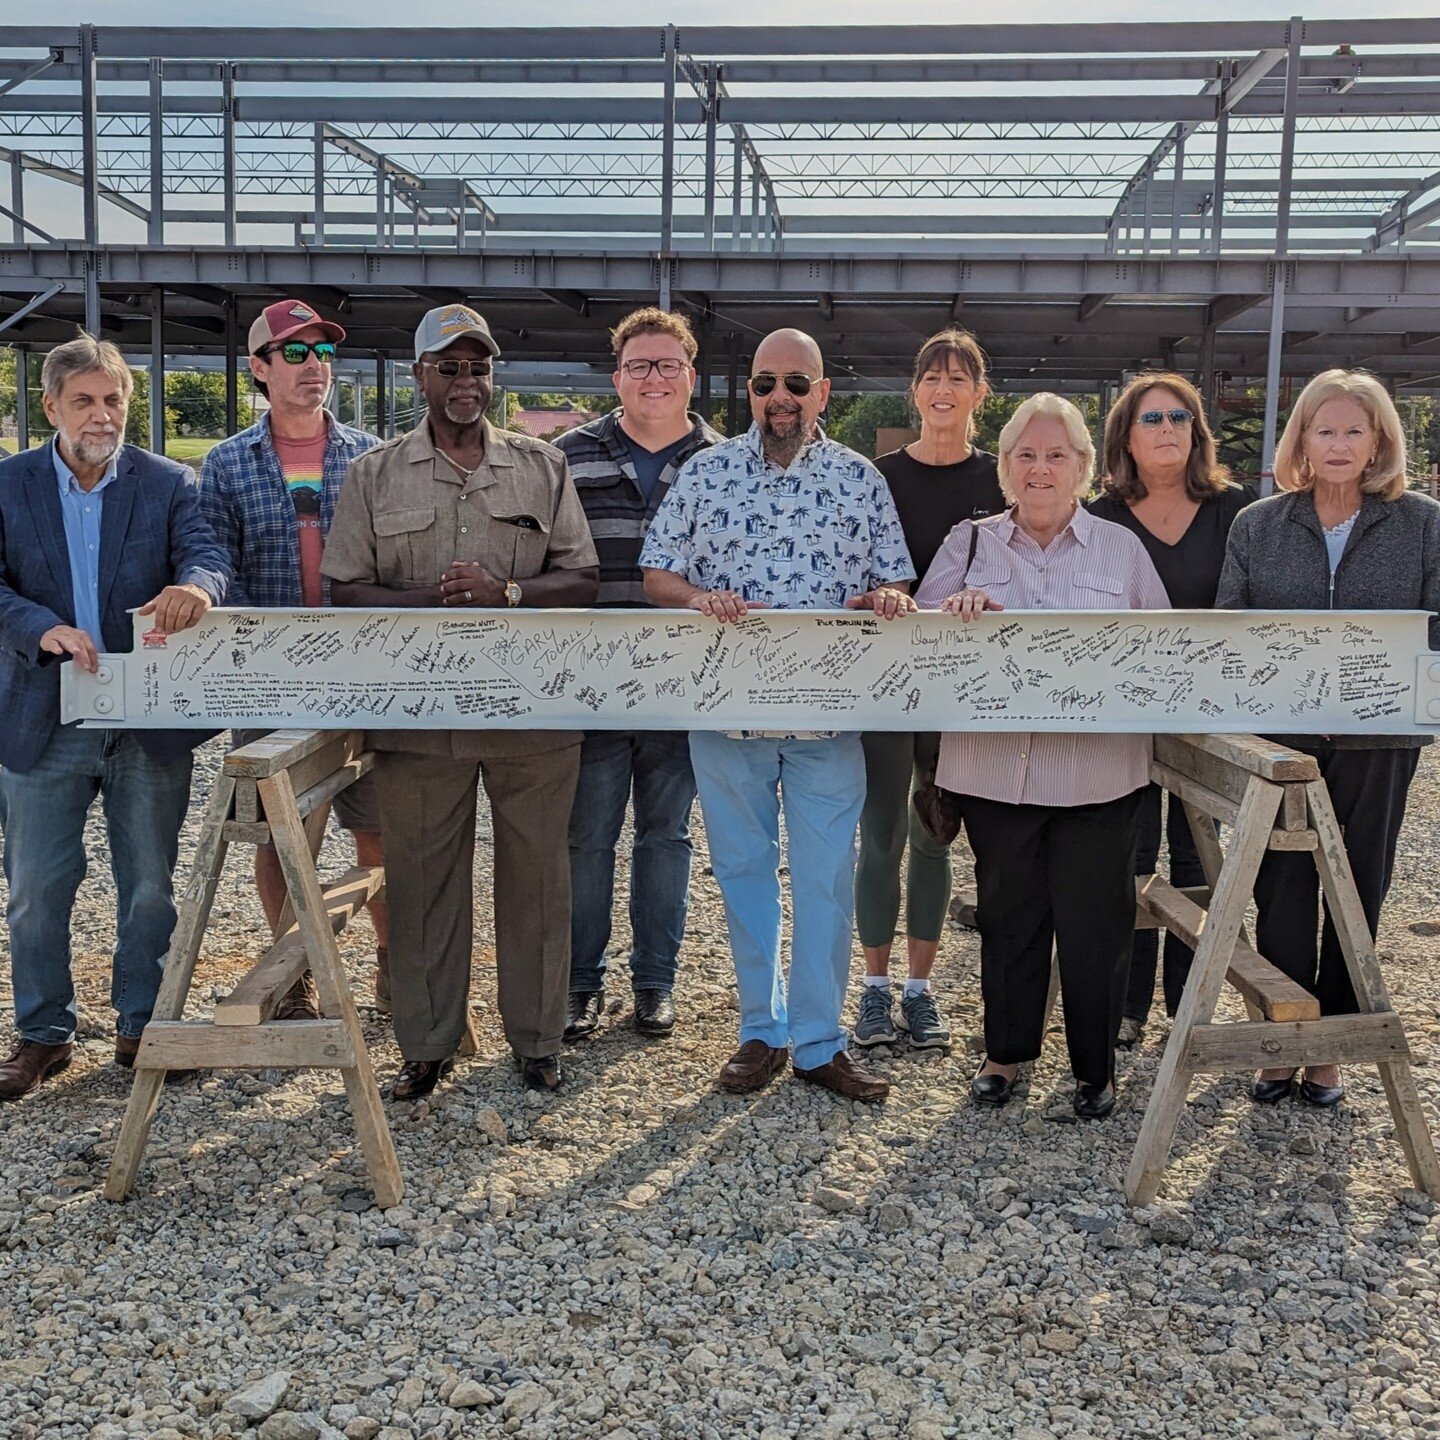 today marked a major milestone in the construction of the new Maury County Judicial Center! the traditional topping out ceremony was held on site and enjoyed by the citizens and commissioners of Maury County

#designmatters #nashvillearchitect @the.a